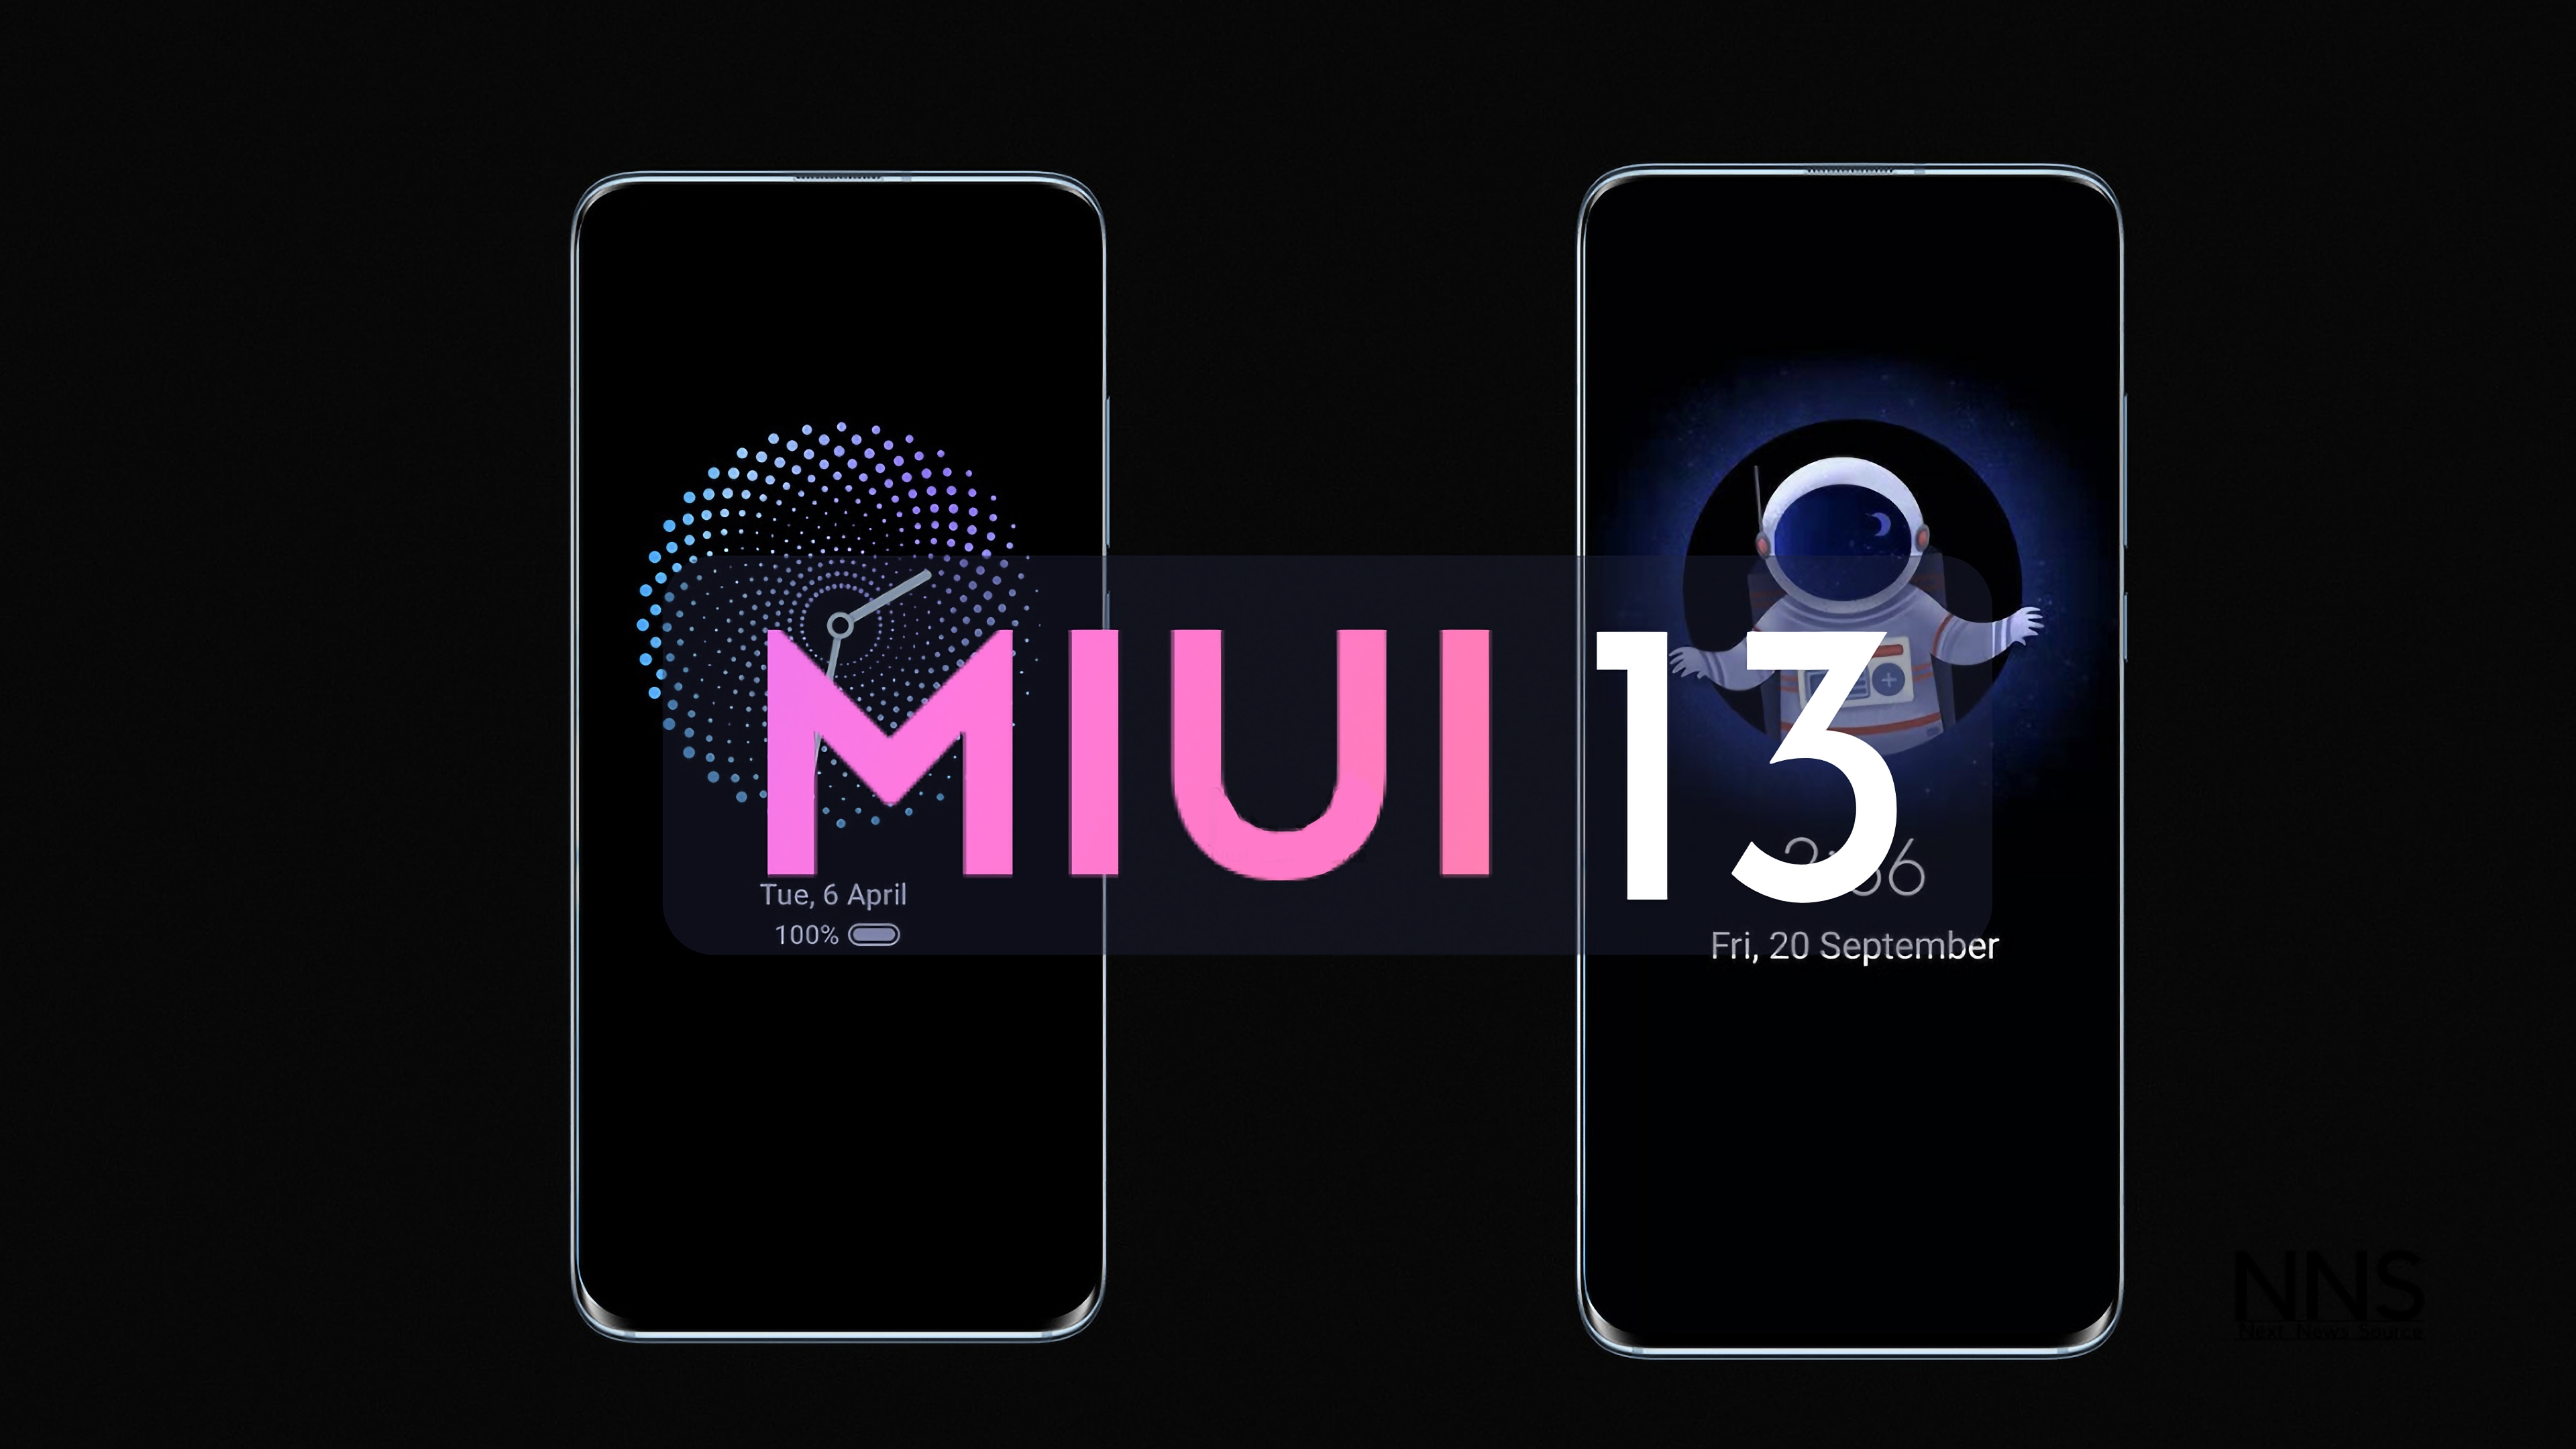 Xiaomi hinted at the release of MIUI 13 in November